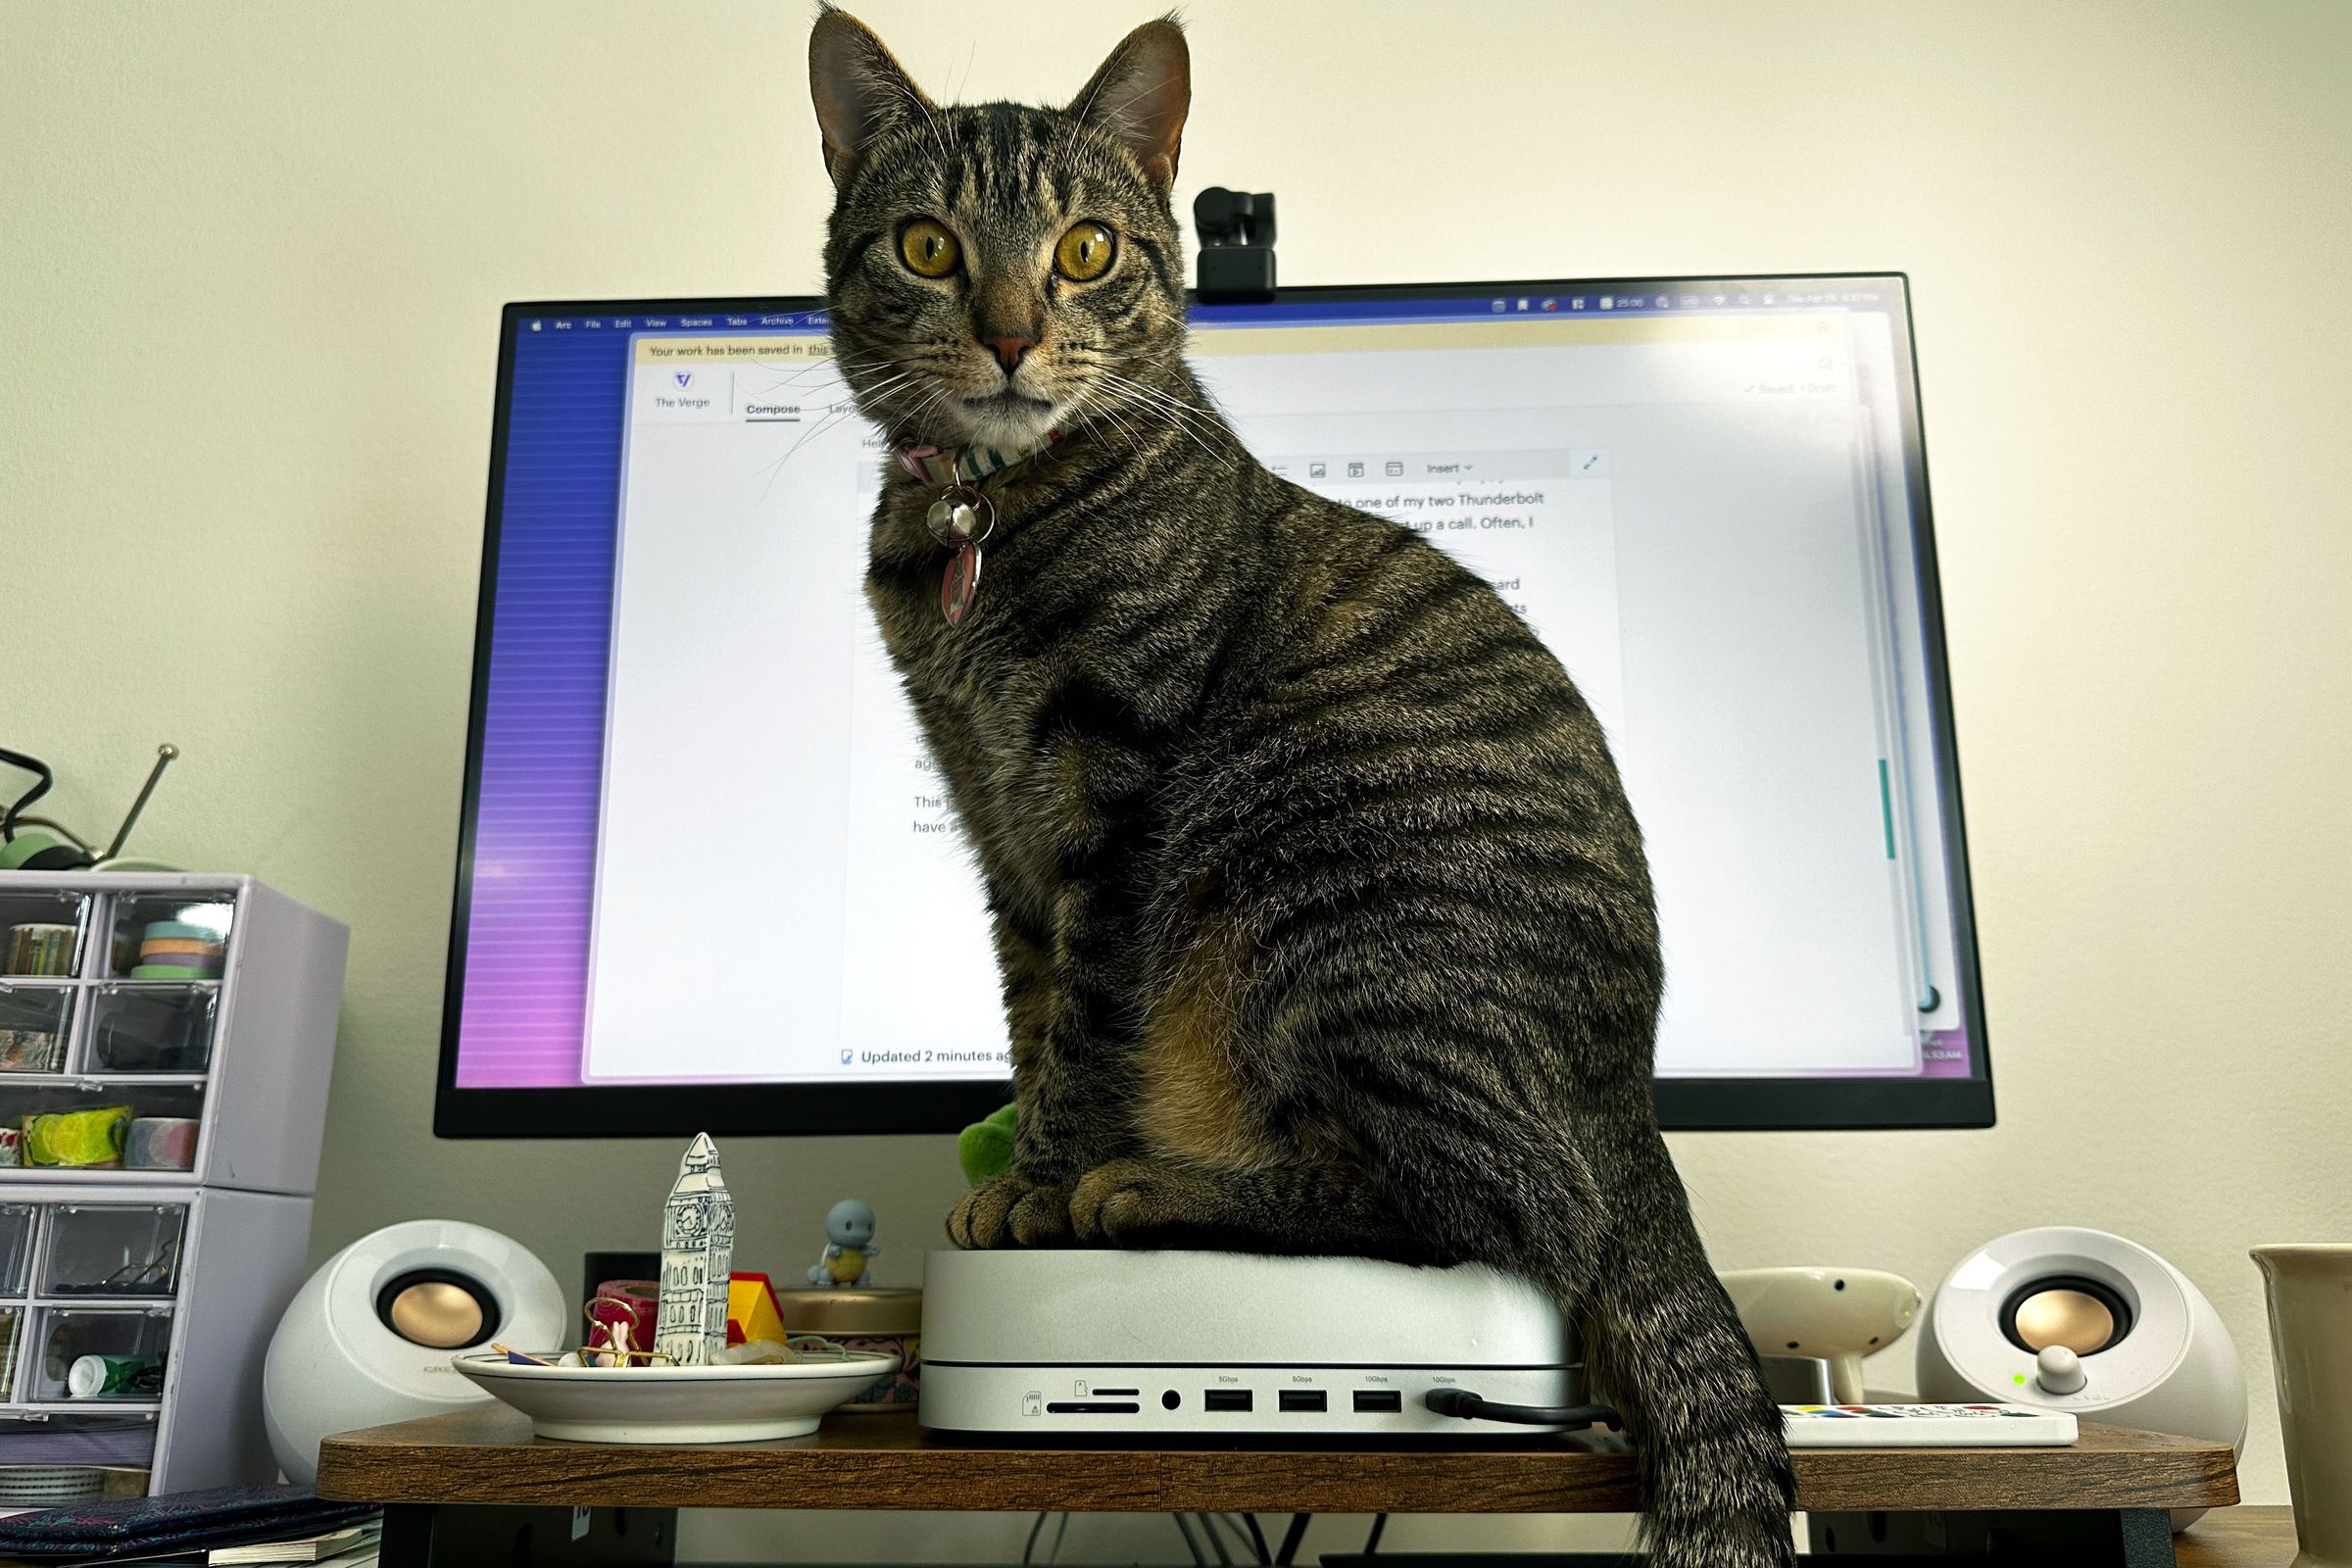 Cat staring imperiously down while sitting on the Mac Mini